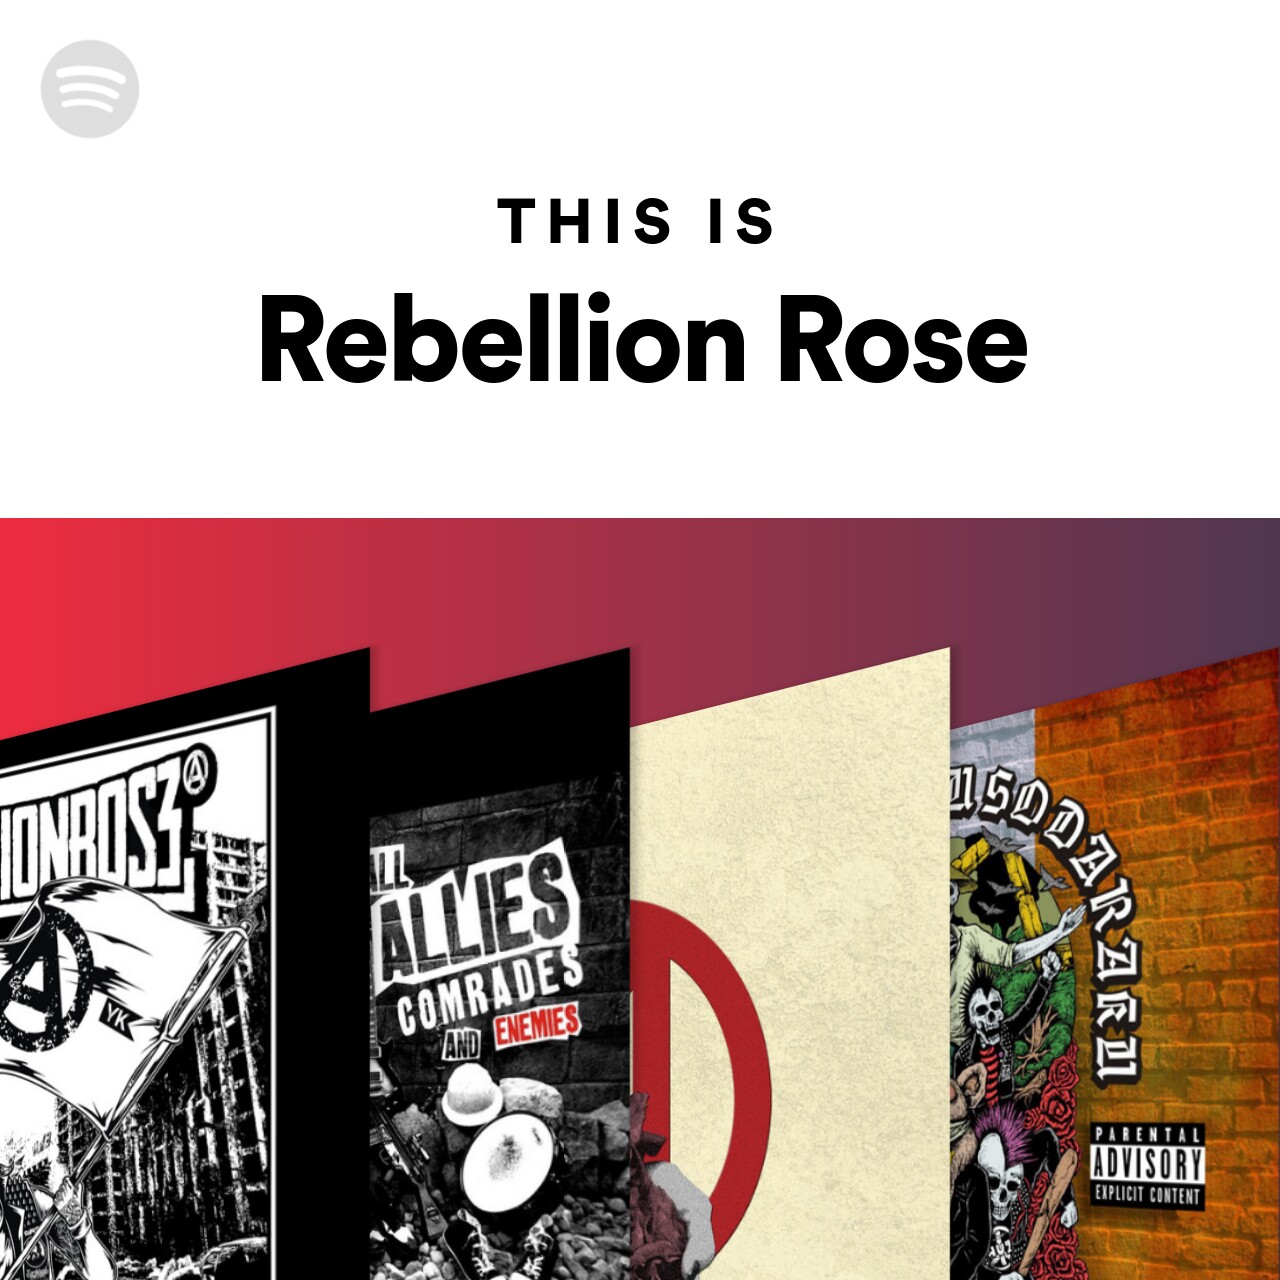 This is Rebellion Rose